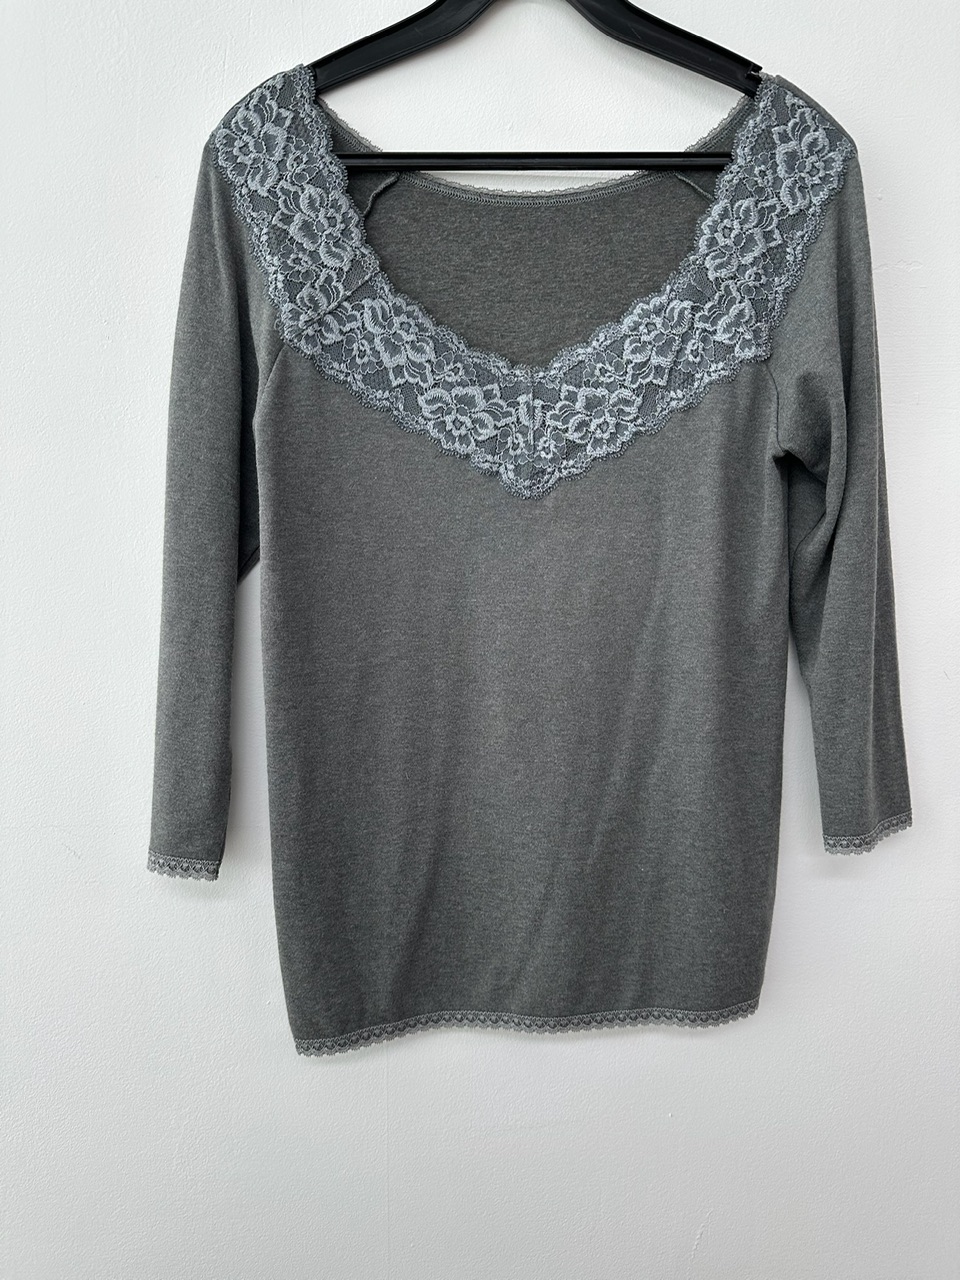 Grey lace detail top